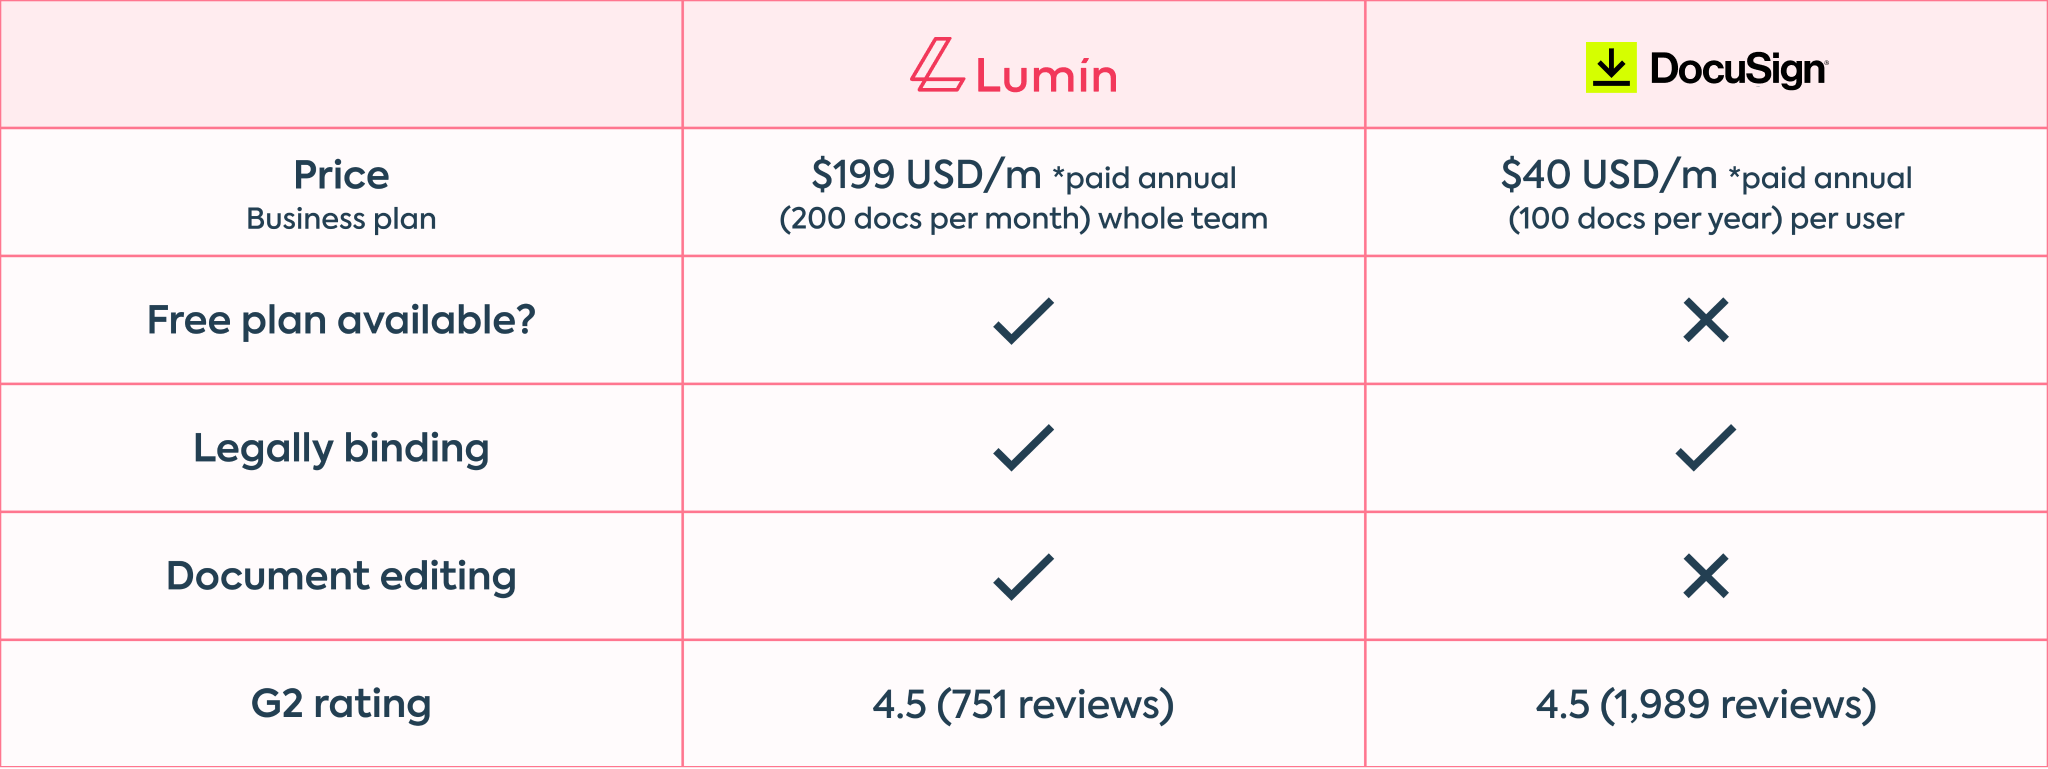 a table highlights the key differences between the Lumin and Docusign business plans. Lumin costs $199 per month, which includes as many team members as you like and 200 documents per user per month. DocuSign is $40 per month, per user, which includes 100 documents per year per user. Both are legally binding and both have G2 reviews of 4.5. Lumin has a free plan but DocuSign does not. Lumin includes document editing but DocuSign does not.